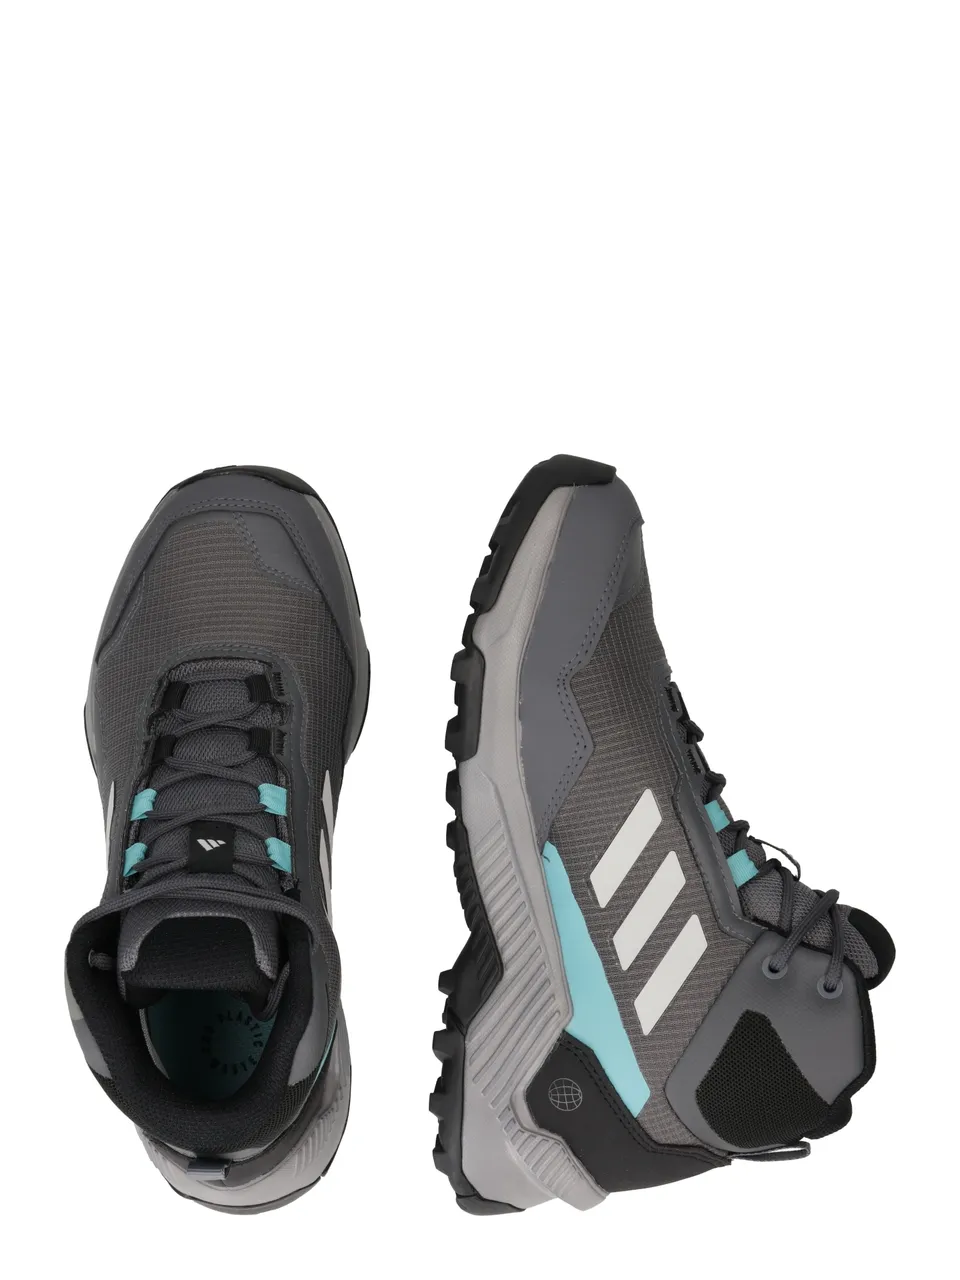 Boots 'Eastrail 2.0'